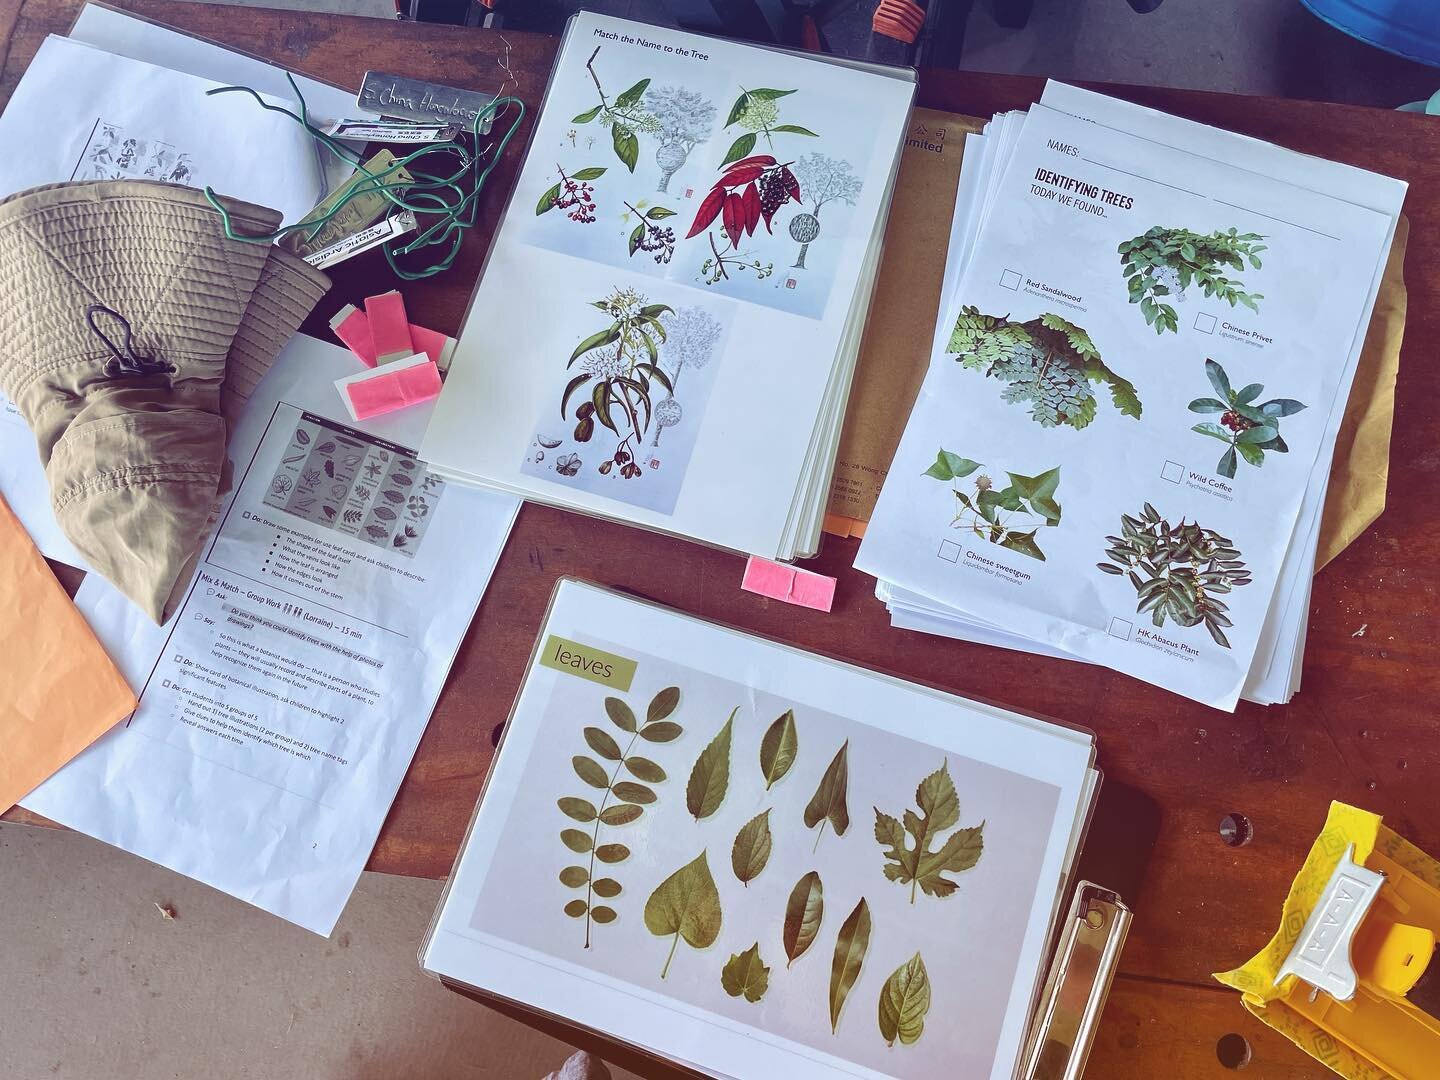 All set for our #identification #workshops @ichkhly this morning! The kids will be trying to identify the trees without labels! 💪🏽💪🏽 

#outdooreducation #nativespecies #botanicalillustration #knowledgeispower